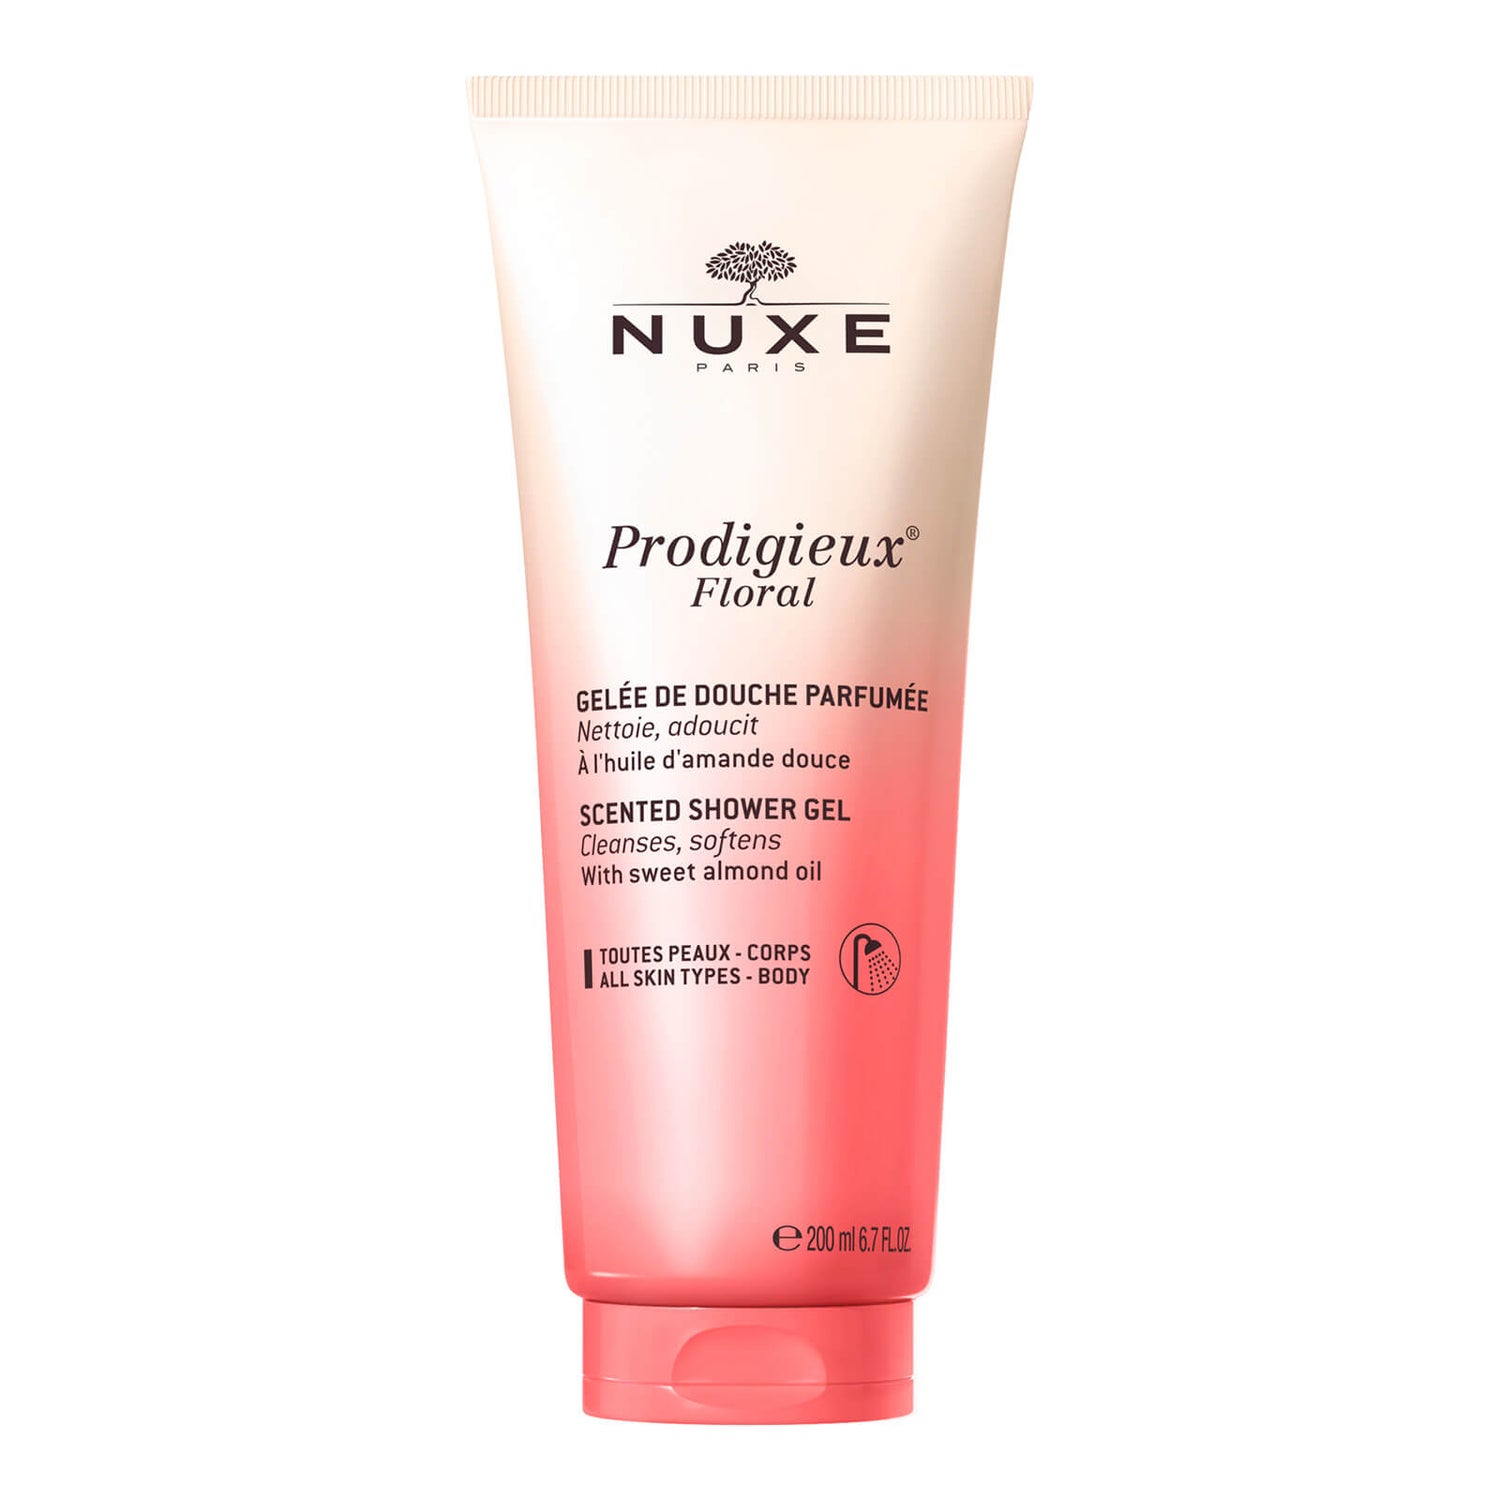 Nuxe Prodigieux Floral Sweet Almond Oil Scented Shower Gel